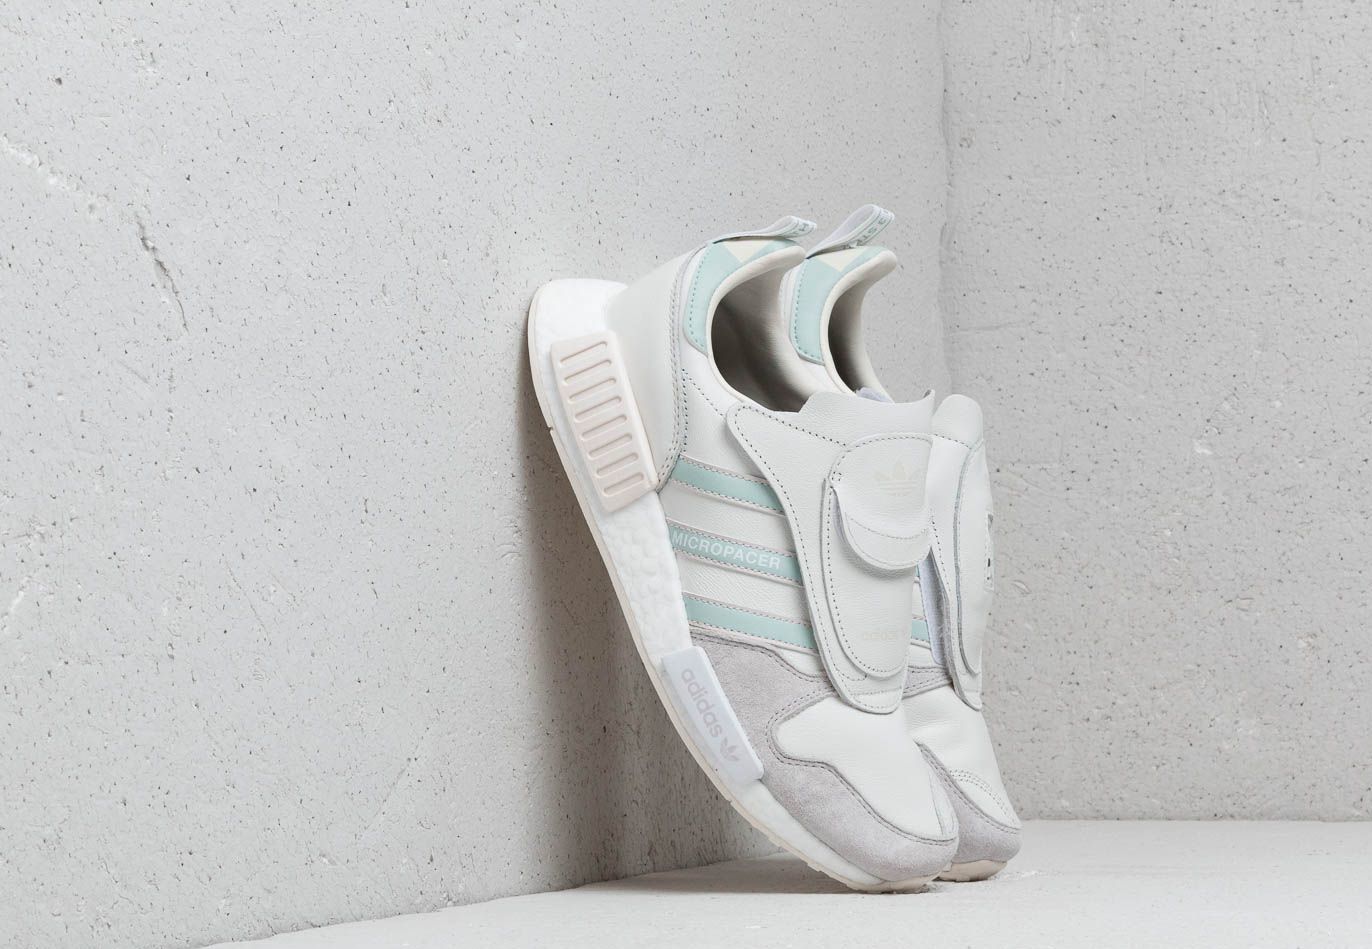 adidas Micropacer x R1 Cloud White/ Ftw White / Grey One G28940